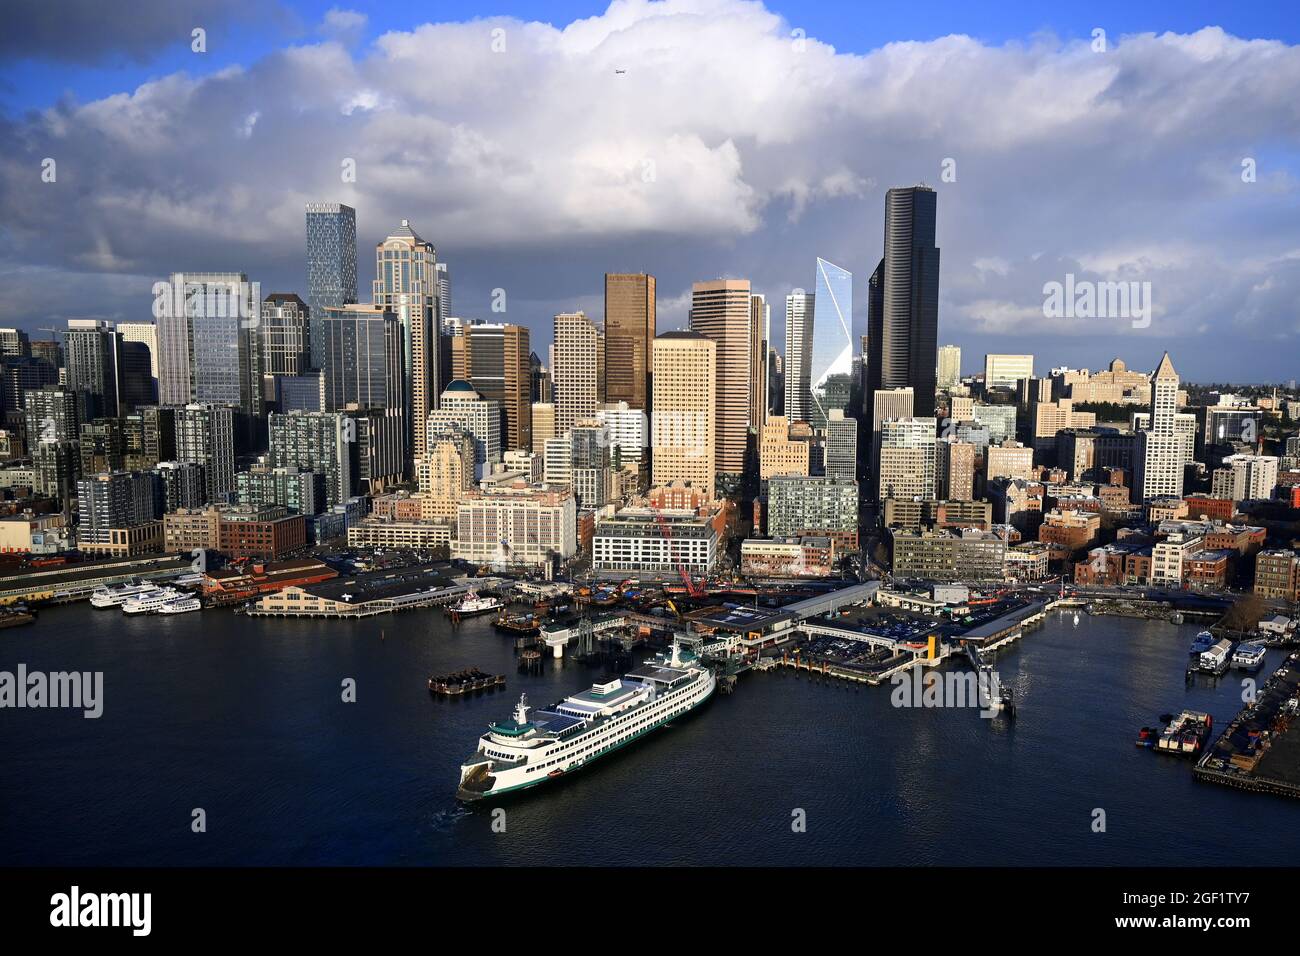 SEATTLE, WASHINGTON, USA, AERIAL VIEW, WITH PUGET SOUND FERRY IN PORT Stock Photo